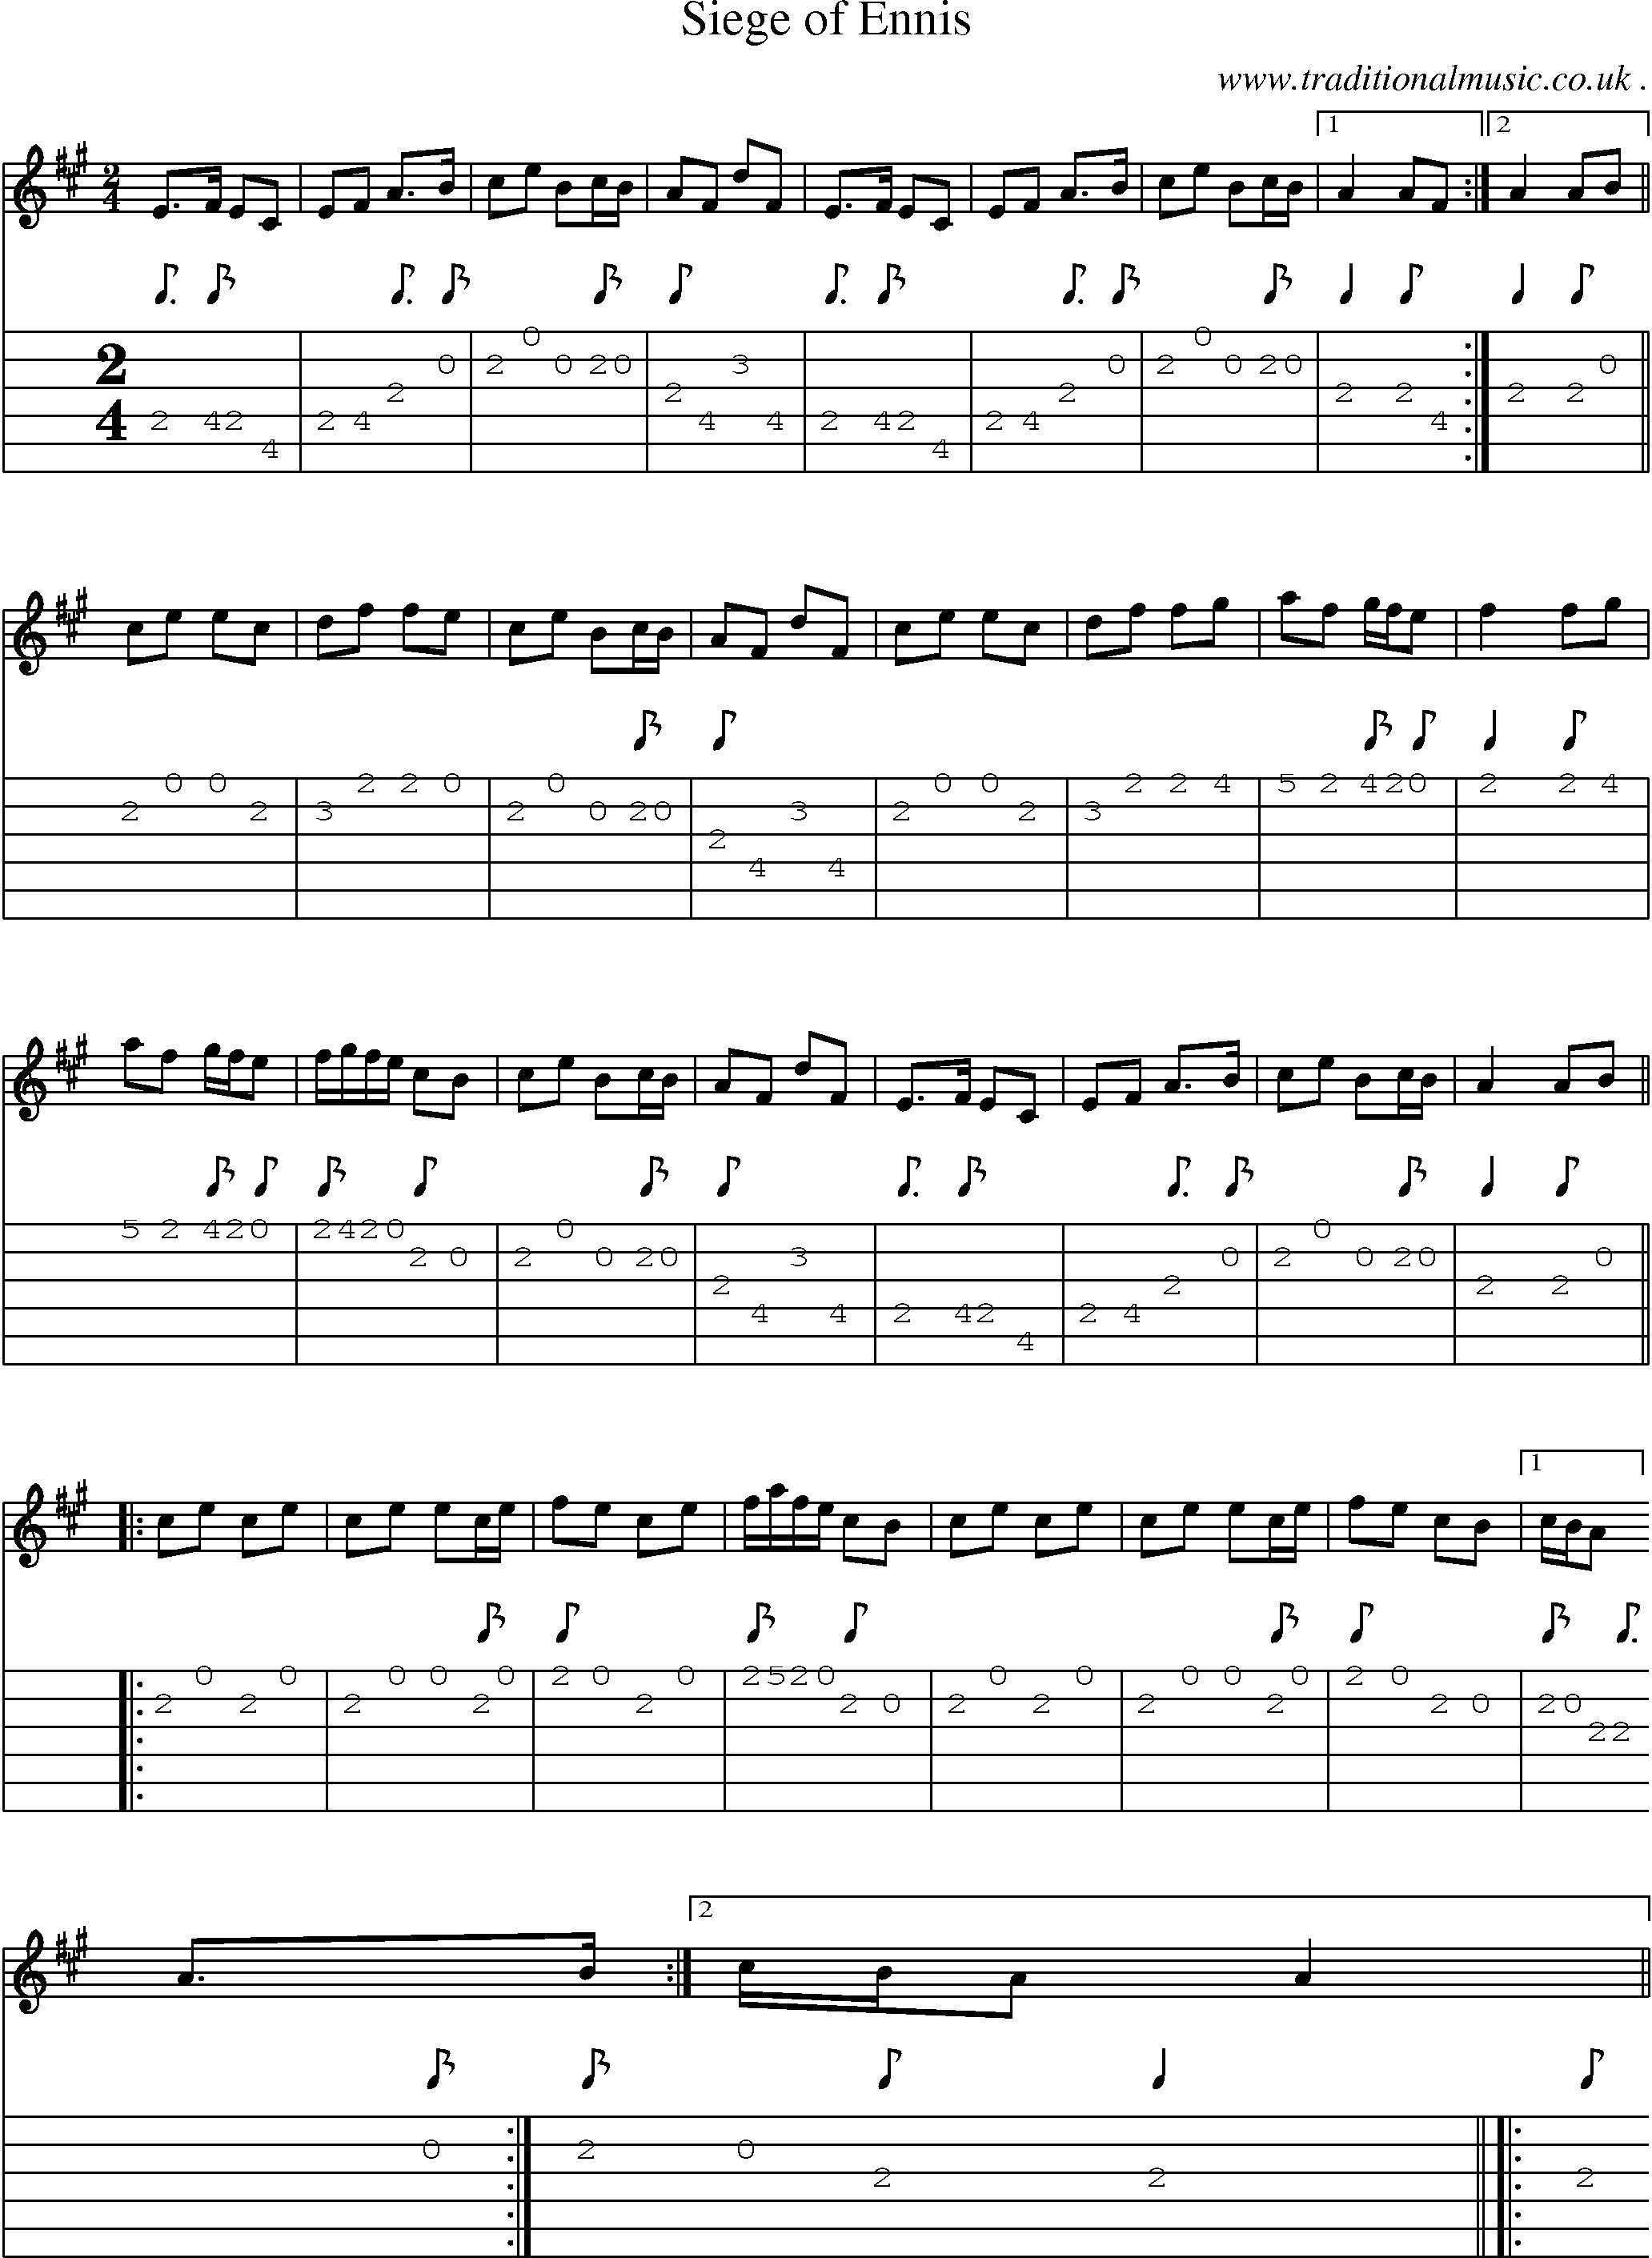 Sheet-Music and Guitar Tabs for Siege Of Ennis